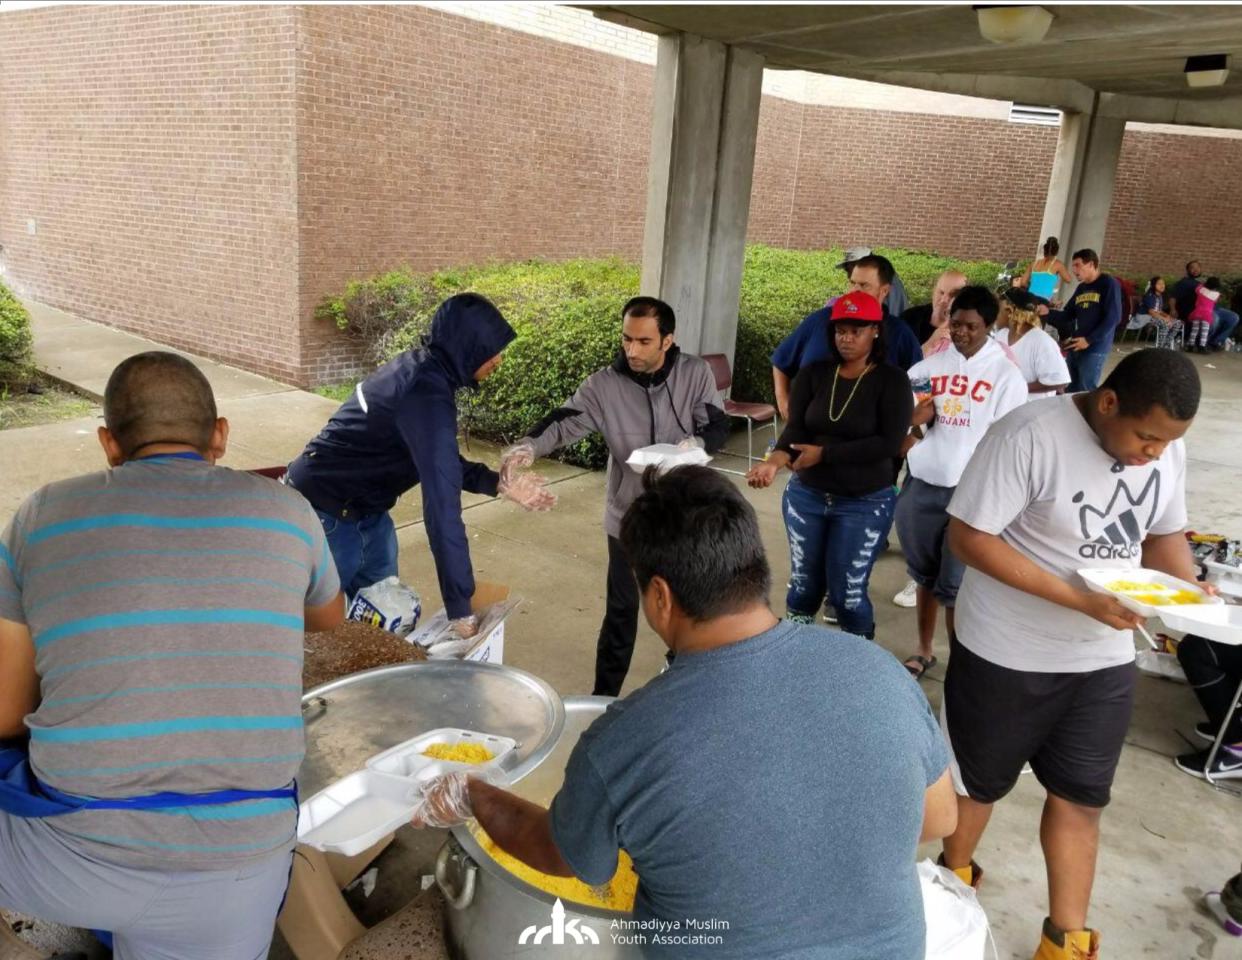 <span class="article-embeddable-caption">Members of the Ahmadiyya Muslim Youth Association hand out hot food in the Houston-area. </span><cite class="article-embeddable-attribution">Source: Ahmadiyya Muslim Youth Association USA</cite>